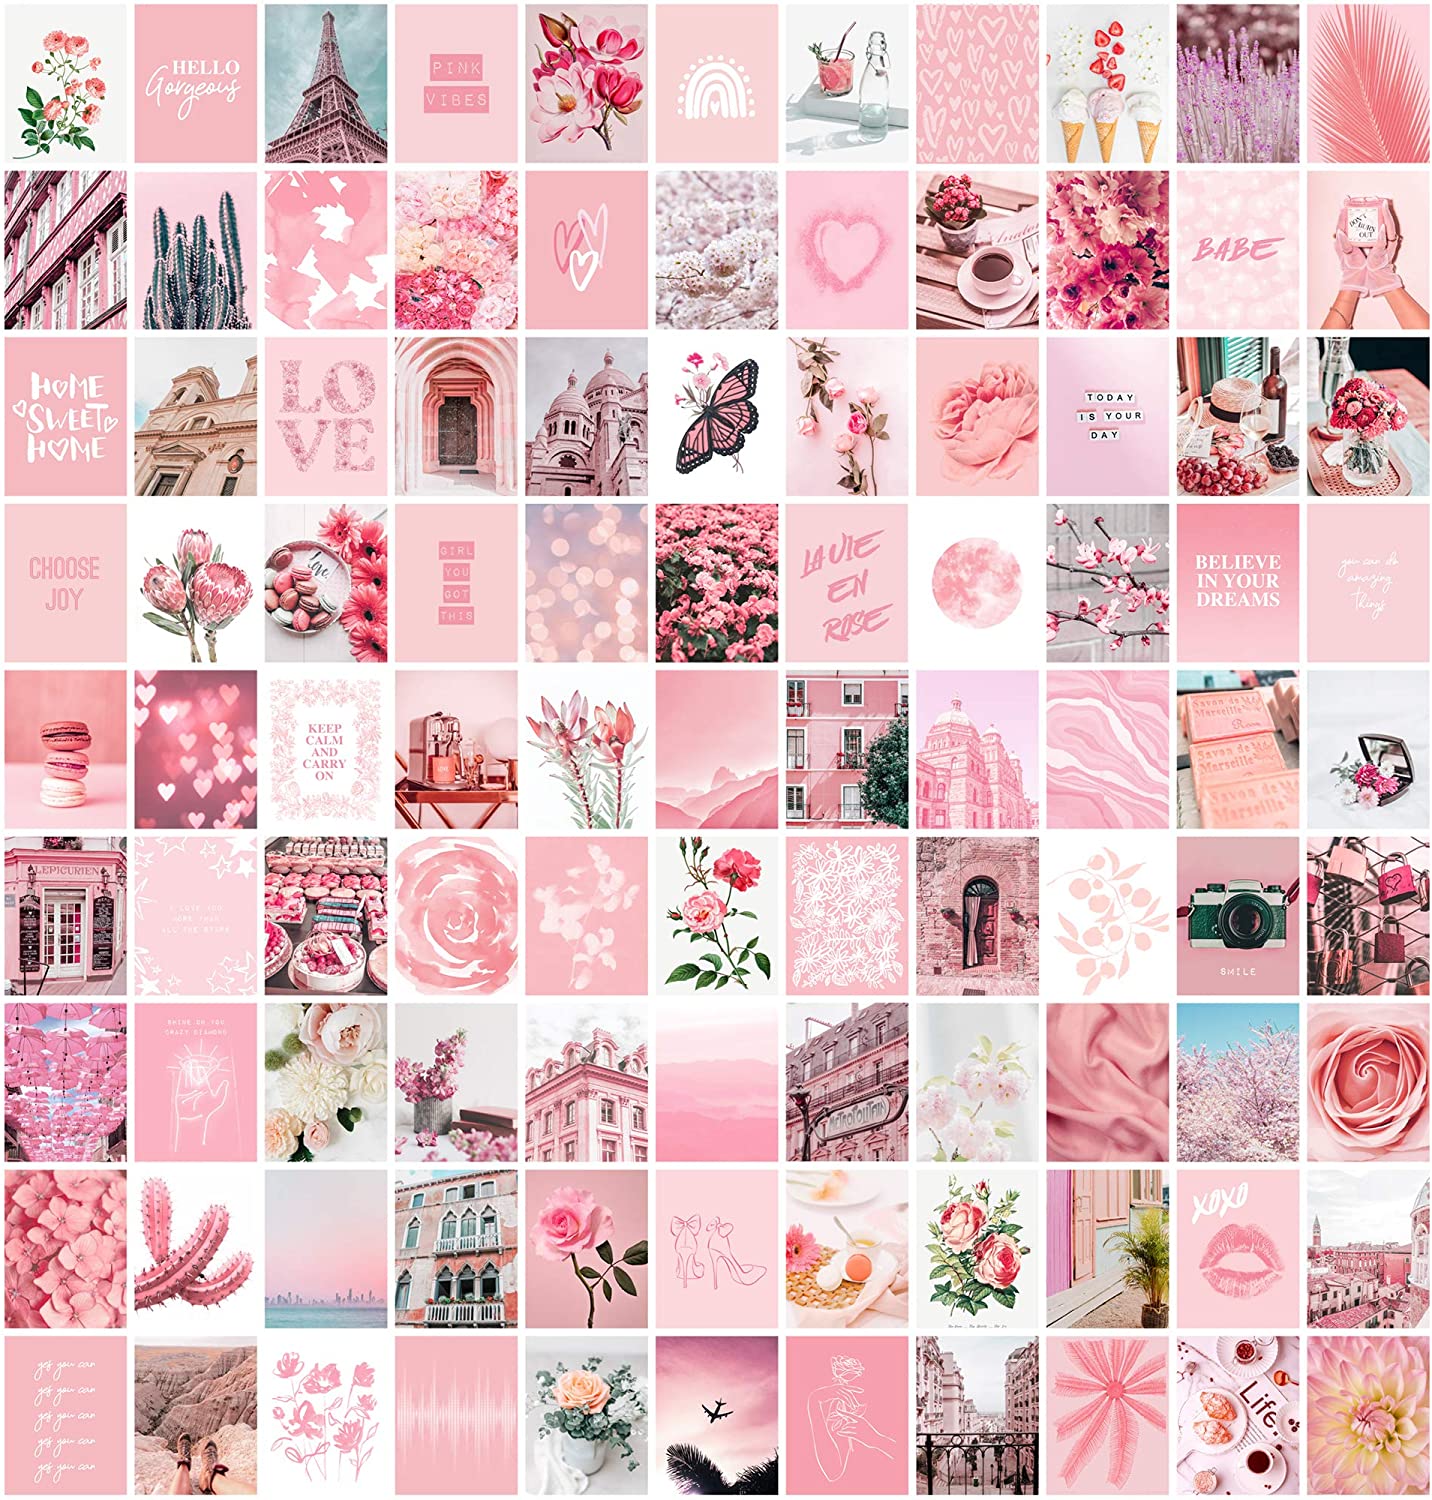 Artivo Pink Aesthetic Wall Collage Kit, 100 Set 4x6 inch, Room Decor for Teen Girls, Pretty Blush Pink Wall Art Print, Dorm Photo Collection, Small Posters for Room Aesthetic: Wall Art